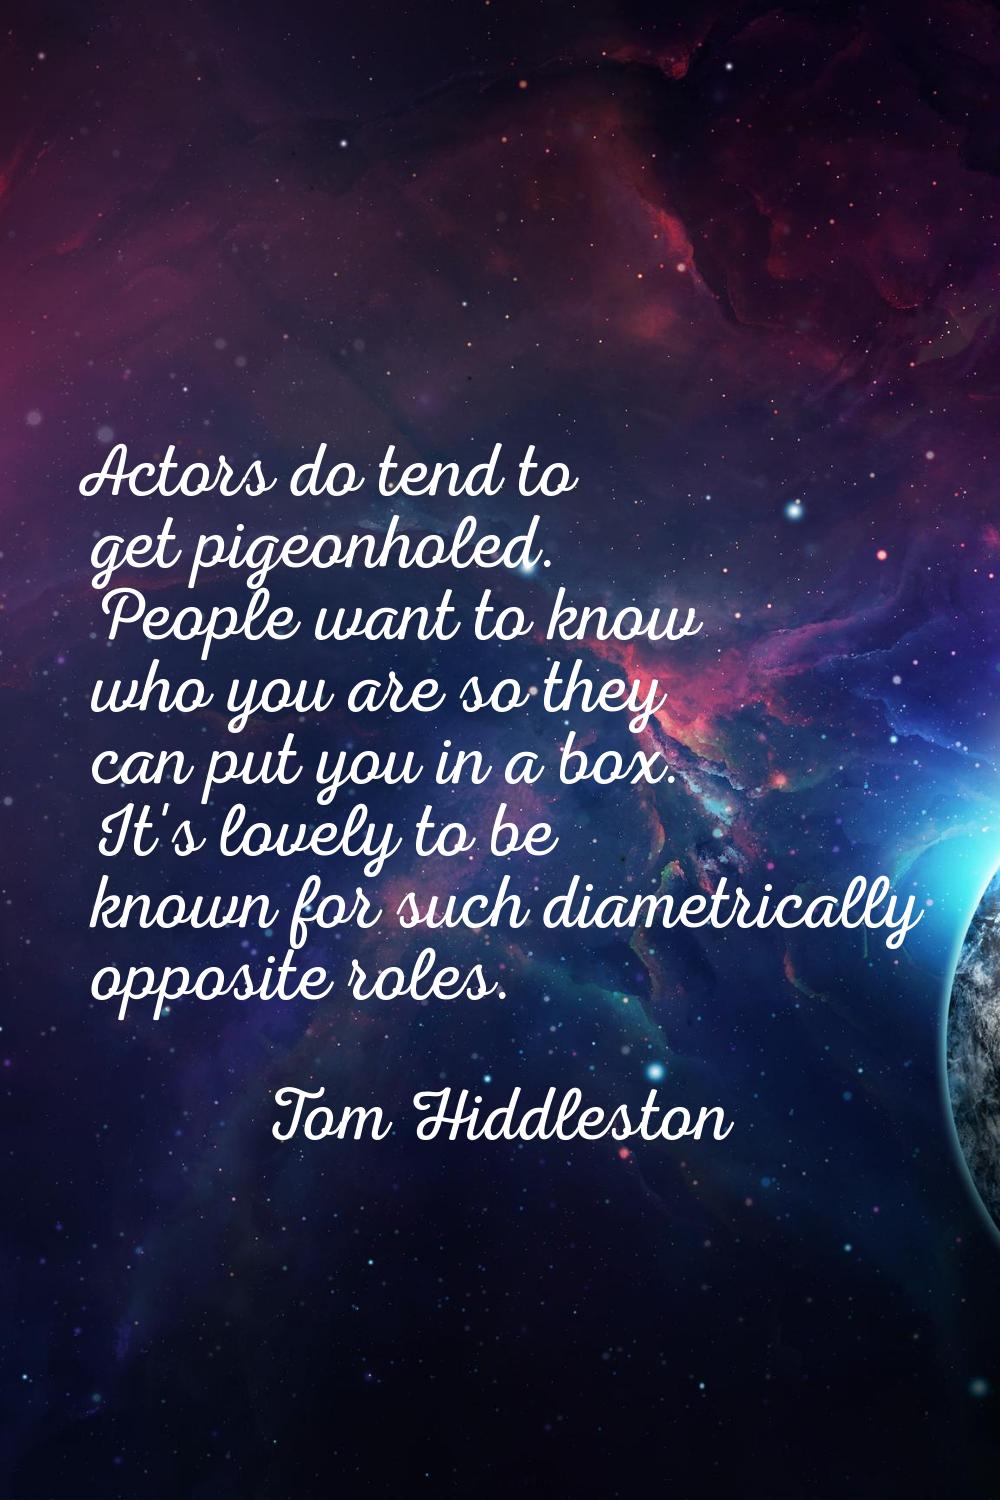 Actors do tend to get pigeonholed. People want to know who you are so they can put you in a box. It